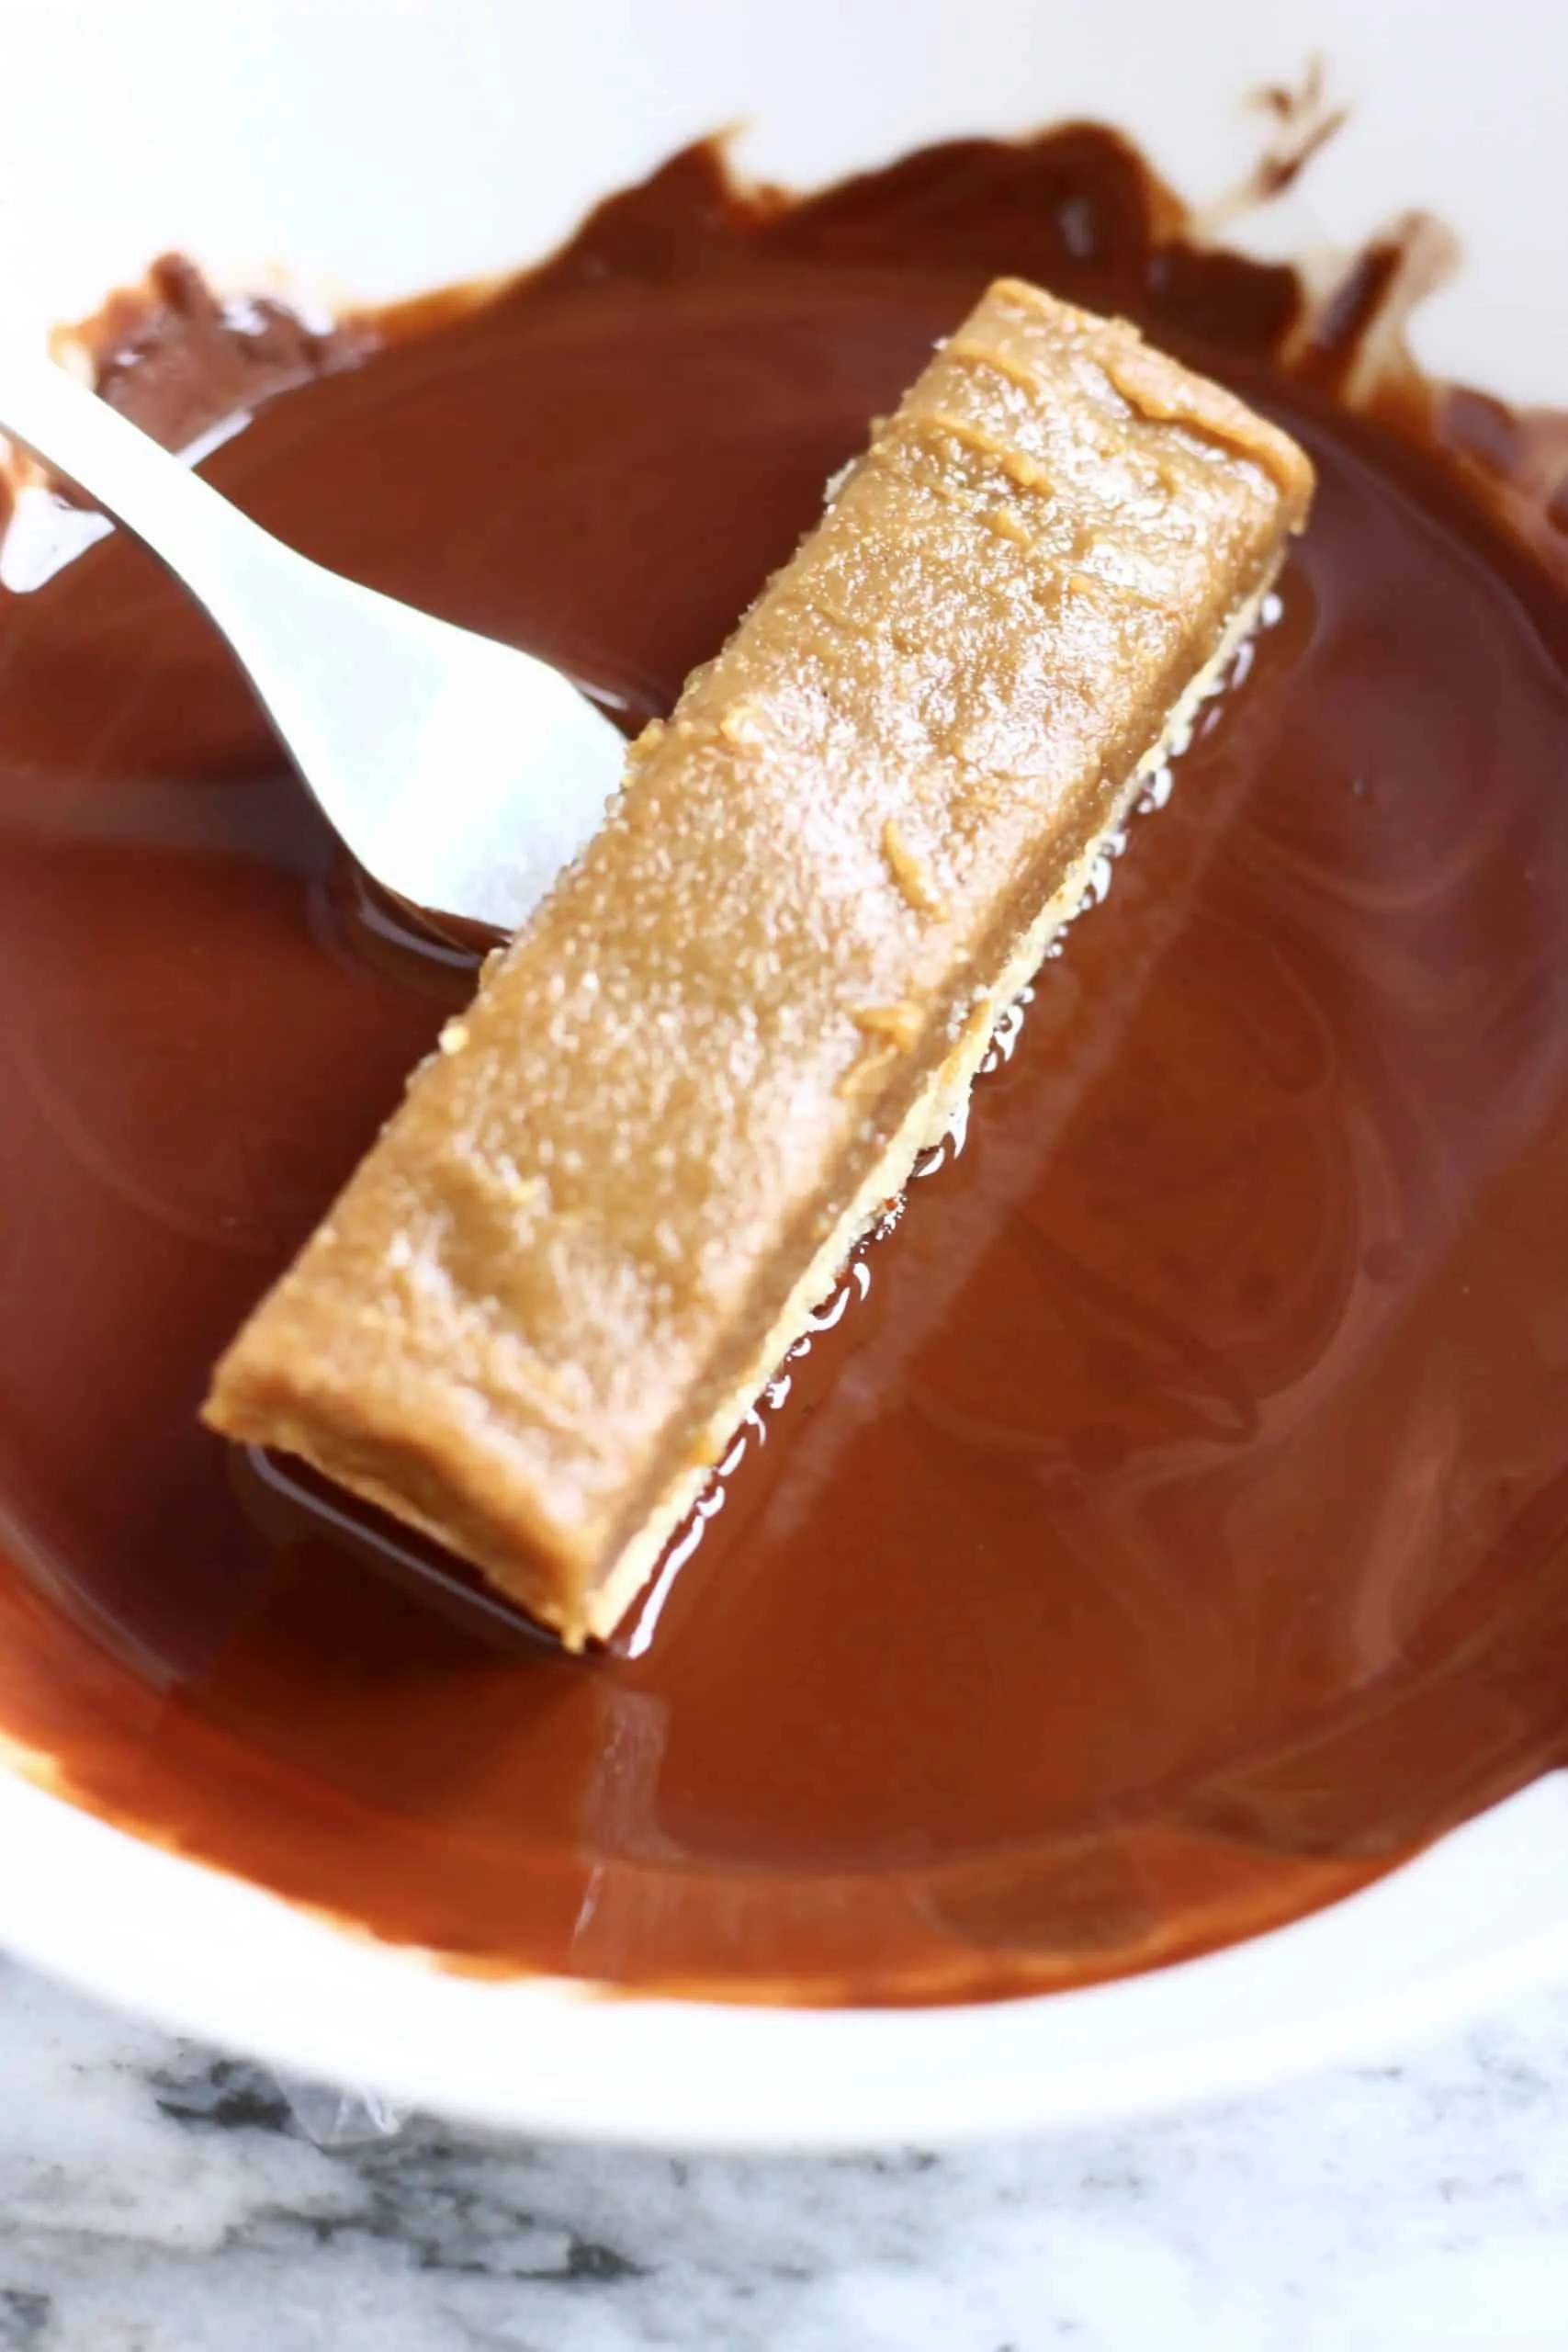 A vegan twix bar being dipped into a bowl of melted chocolate with a fork